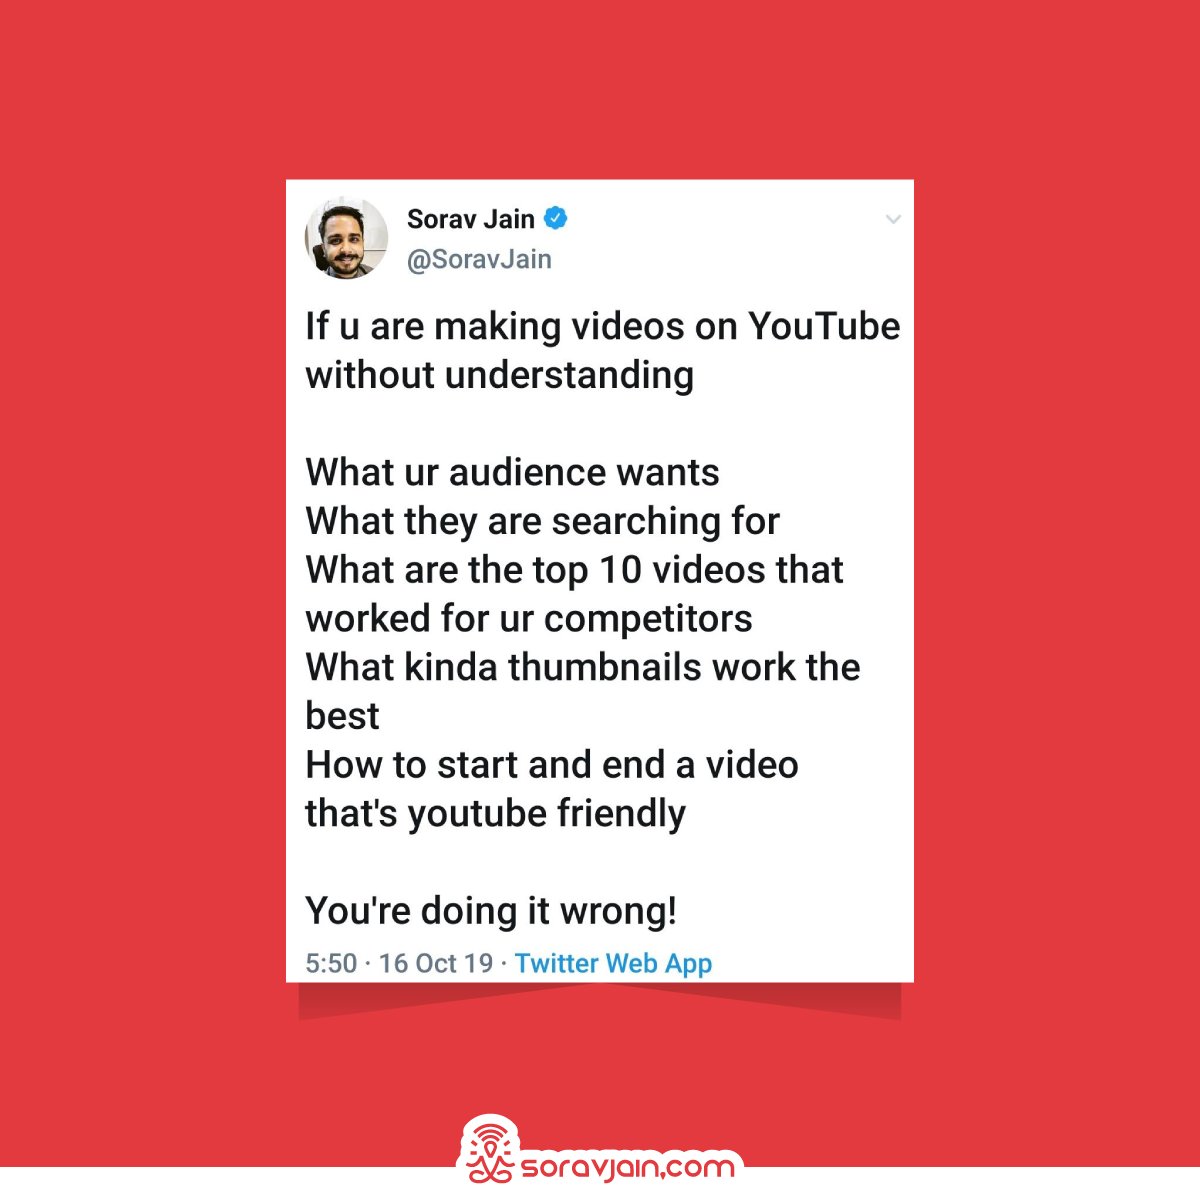 #YouTube is the next big thing. People who have started early are already raking in YouTube money and are established influencers. But it’s never too late to begin. So if you are beginning, do it right!

#DigitalMarketing #DigialMarketingTips